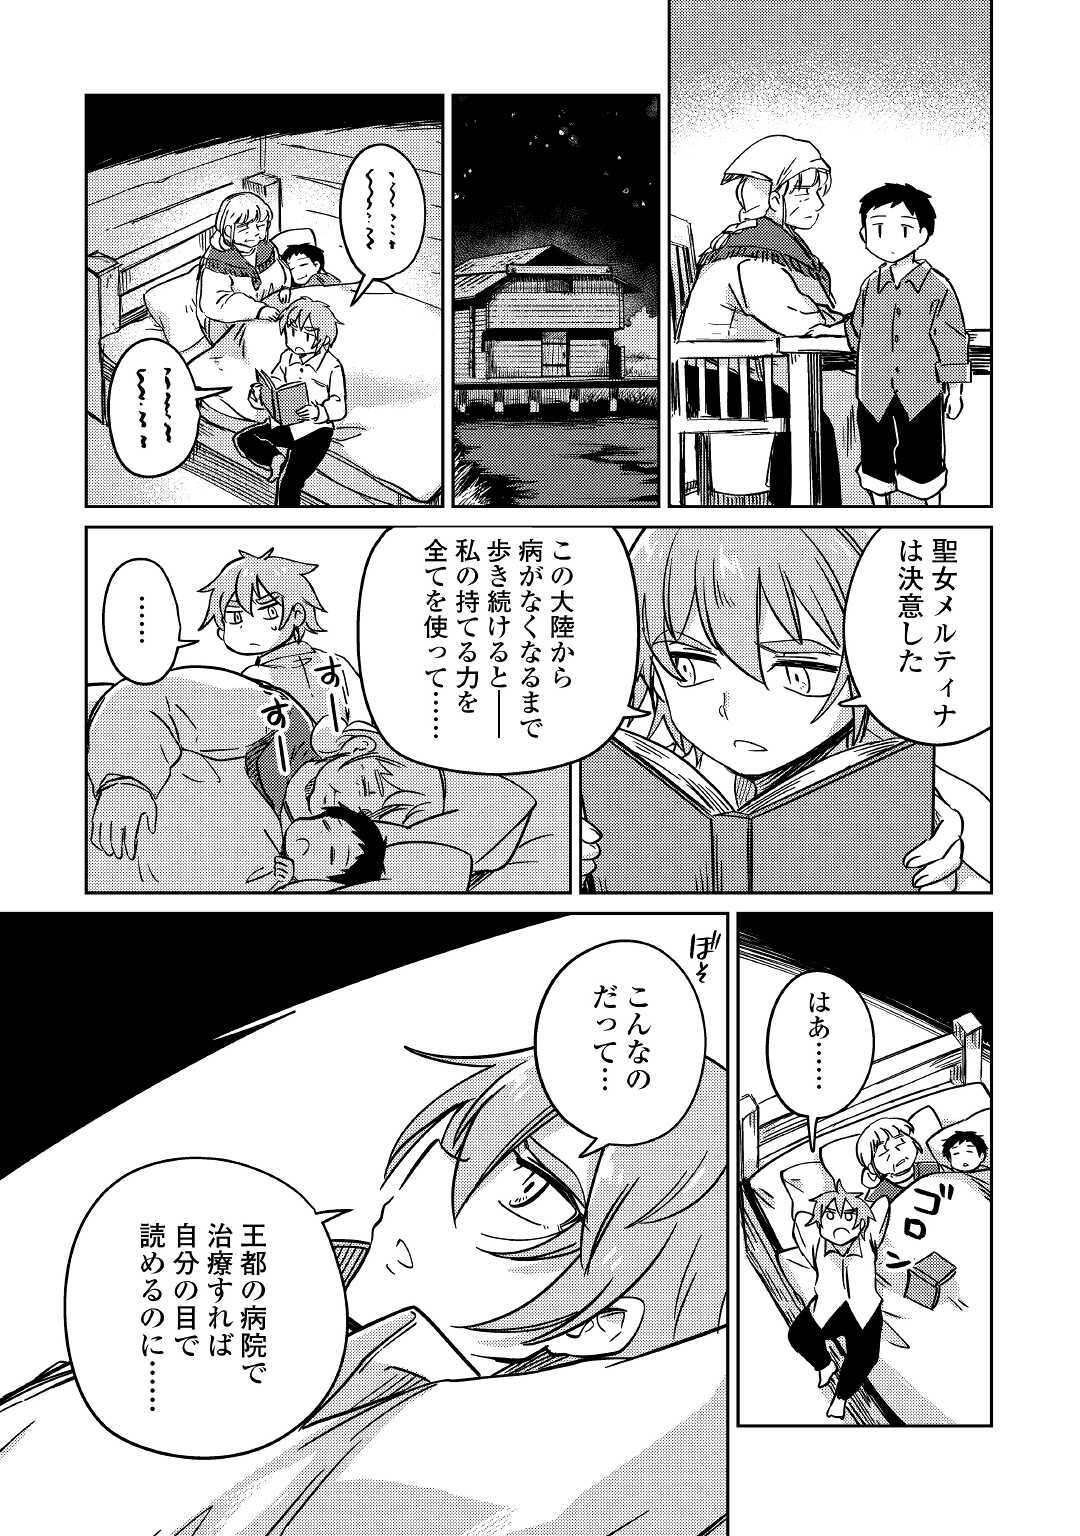 The Former Structural Researcher’s Story of Otherworldly Adventure 第29話 - Page 33